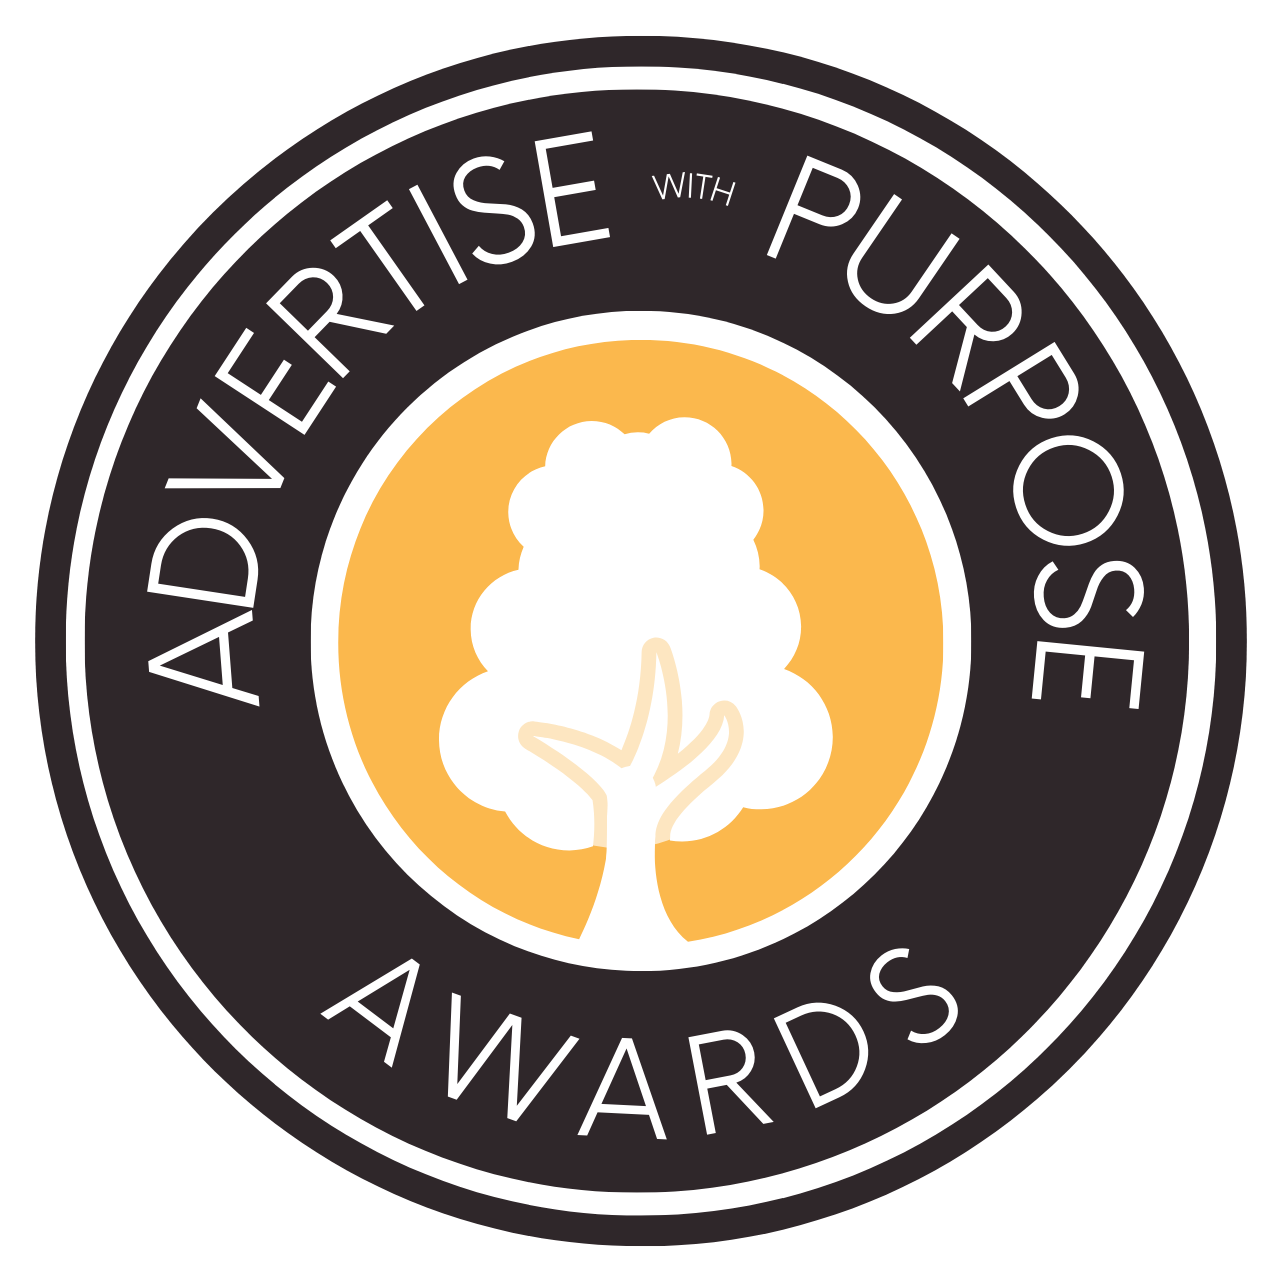 Advertise with Purpose Awards